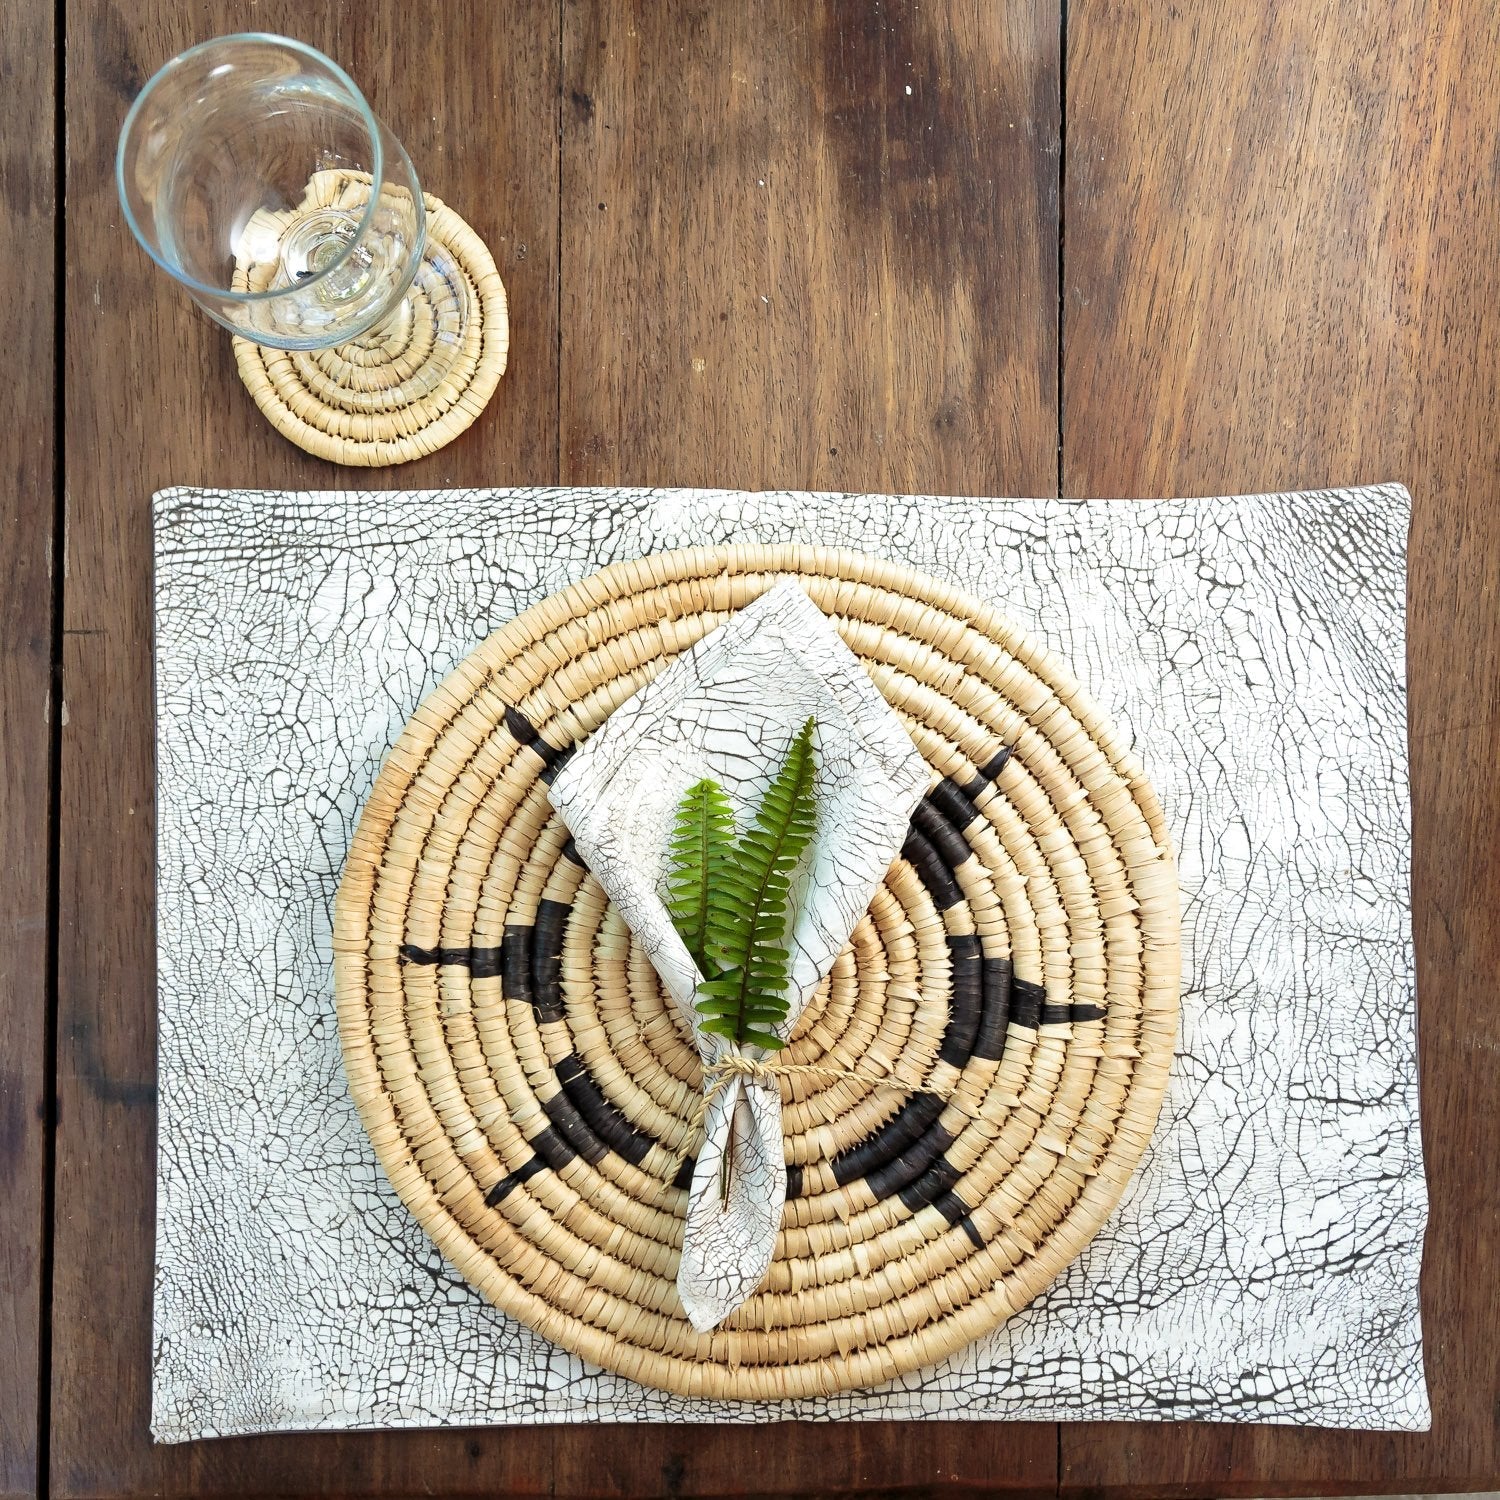 Woven Sun Placemat - Weaving by TRIBAL TEXTILES - Handcrafted Home Decor Interiors - African Made